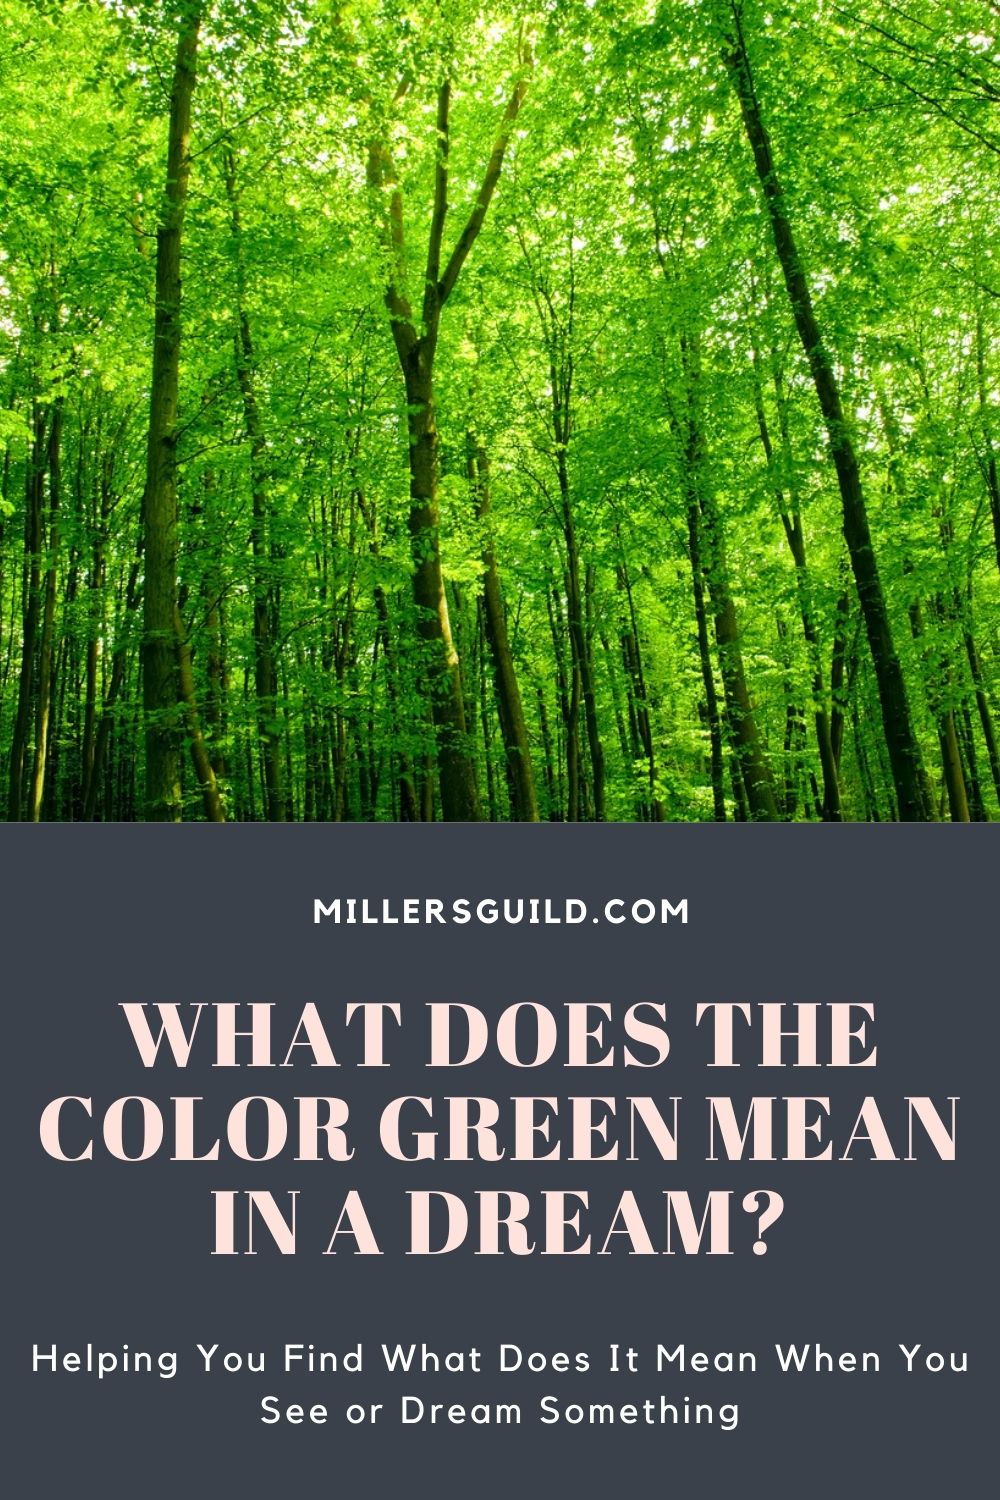 What Does The Color Green Mean In a Dream?